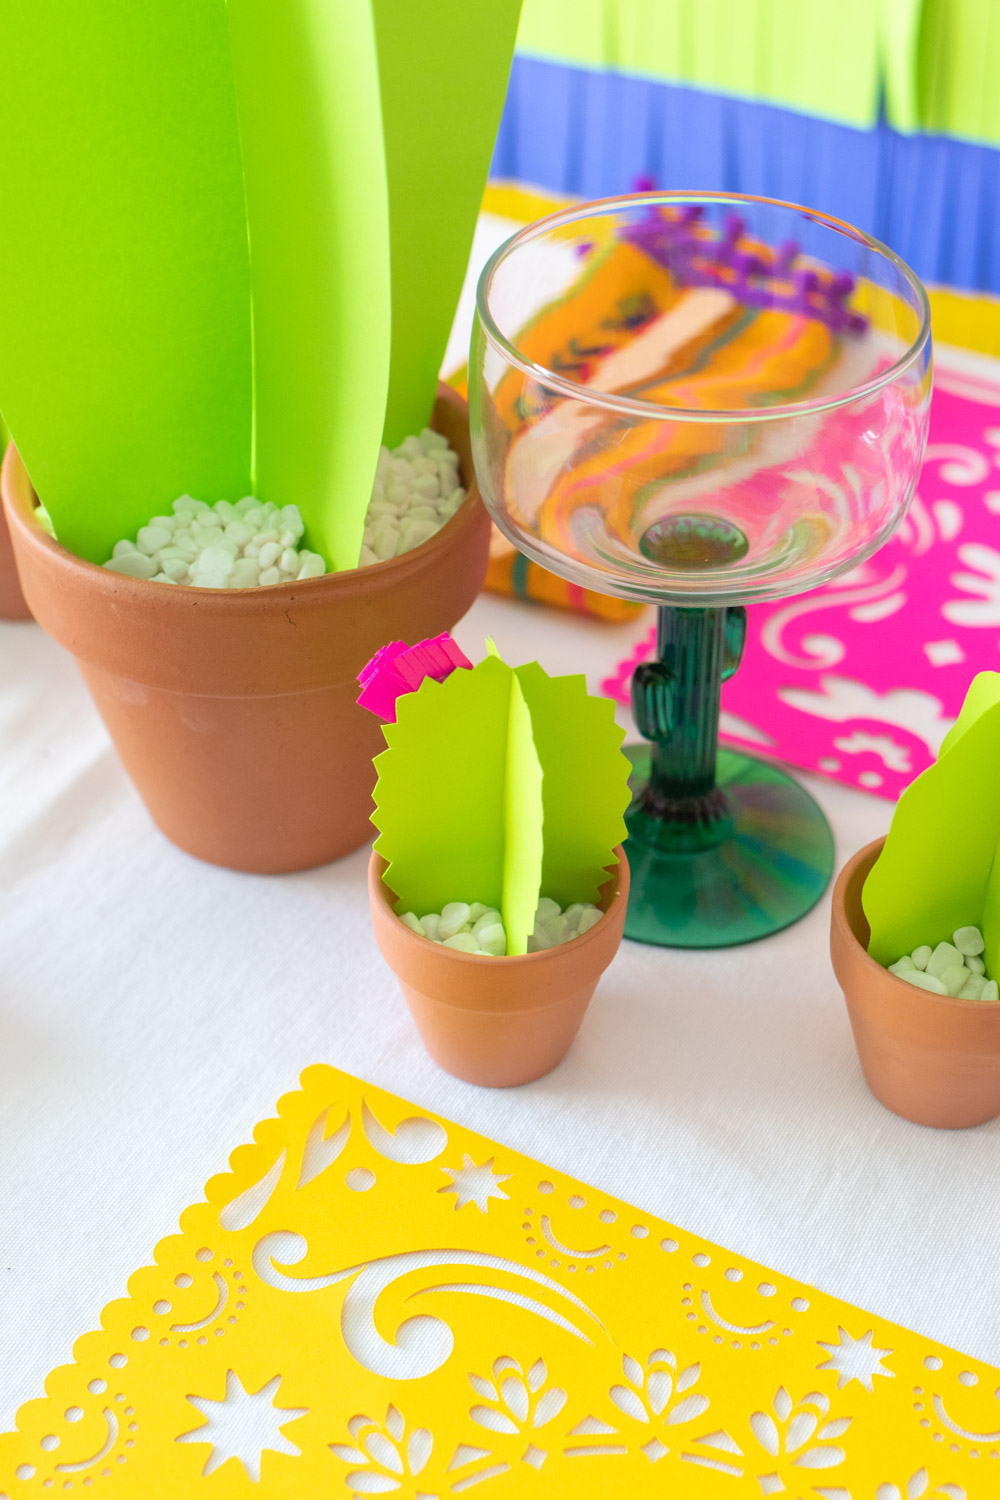 mini paper cacti in pots on tablecloth with glassware and paper placemats 